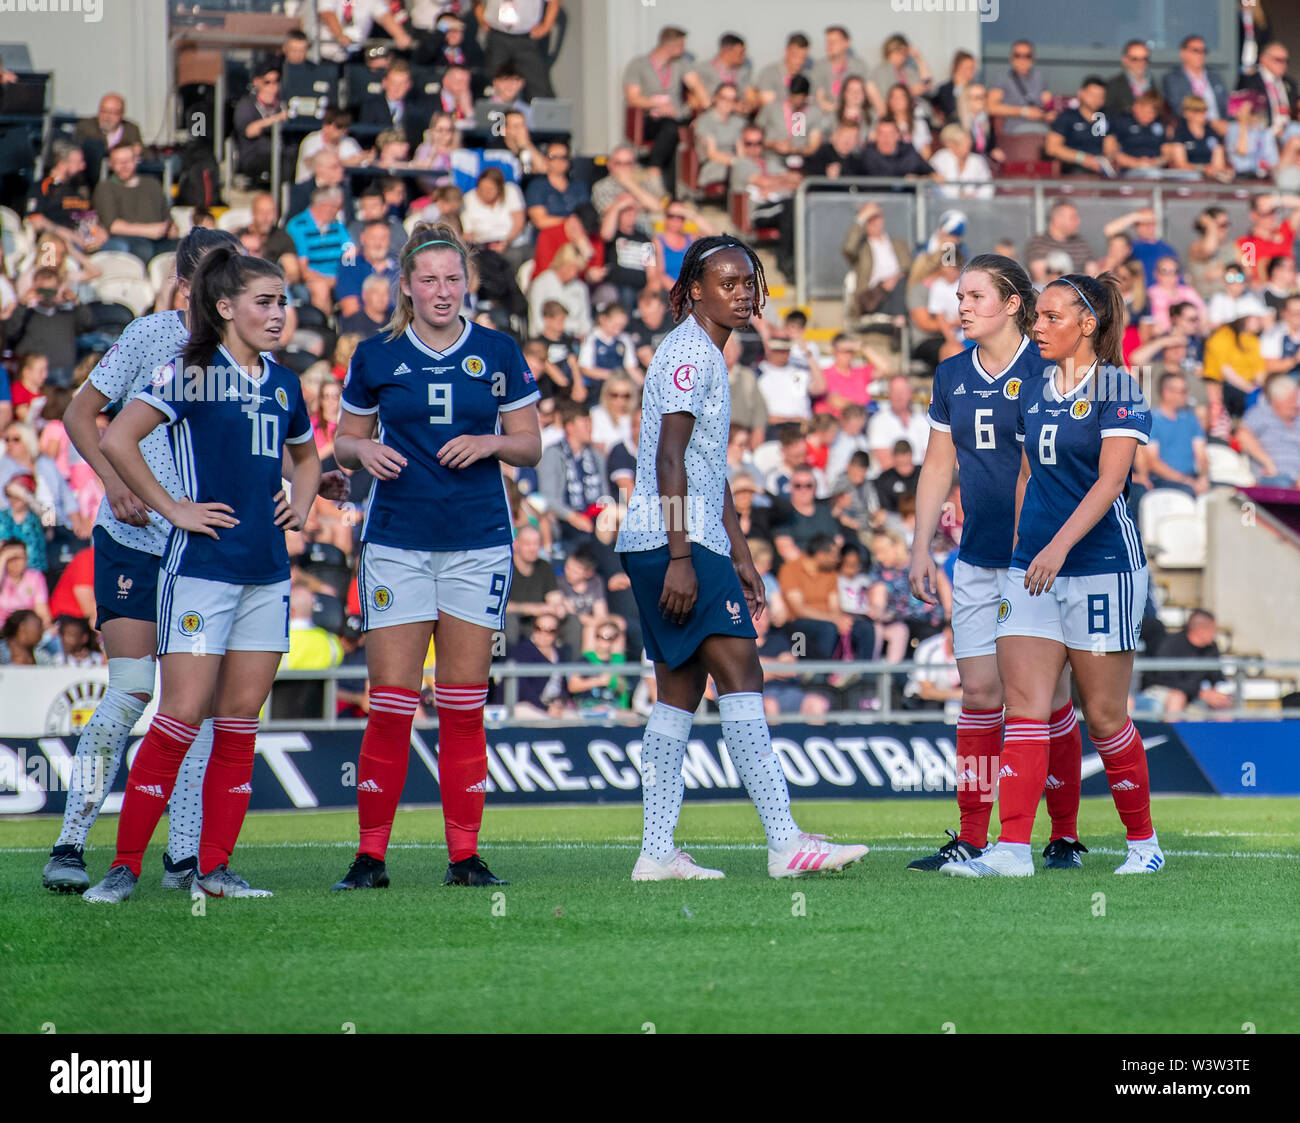 Football Ladies Team Group High Resolution Stock Photography and Images -  Alamy